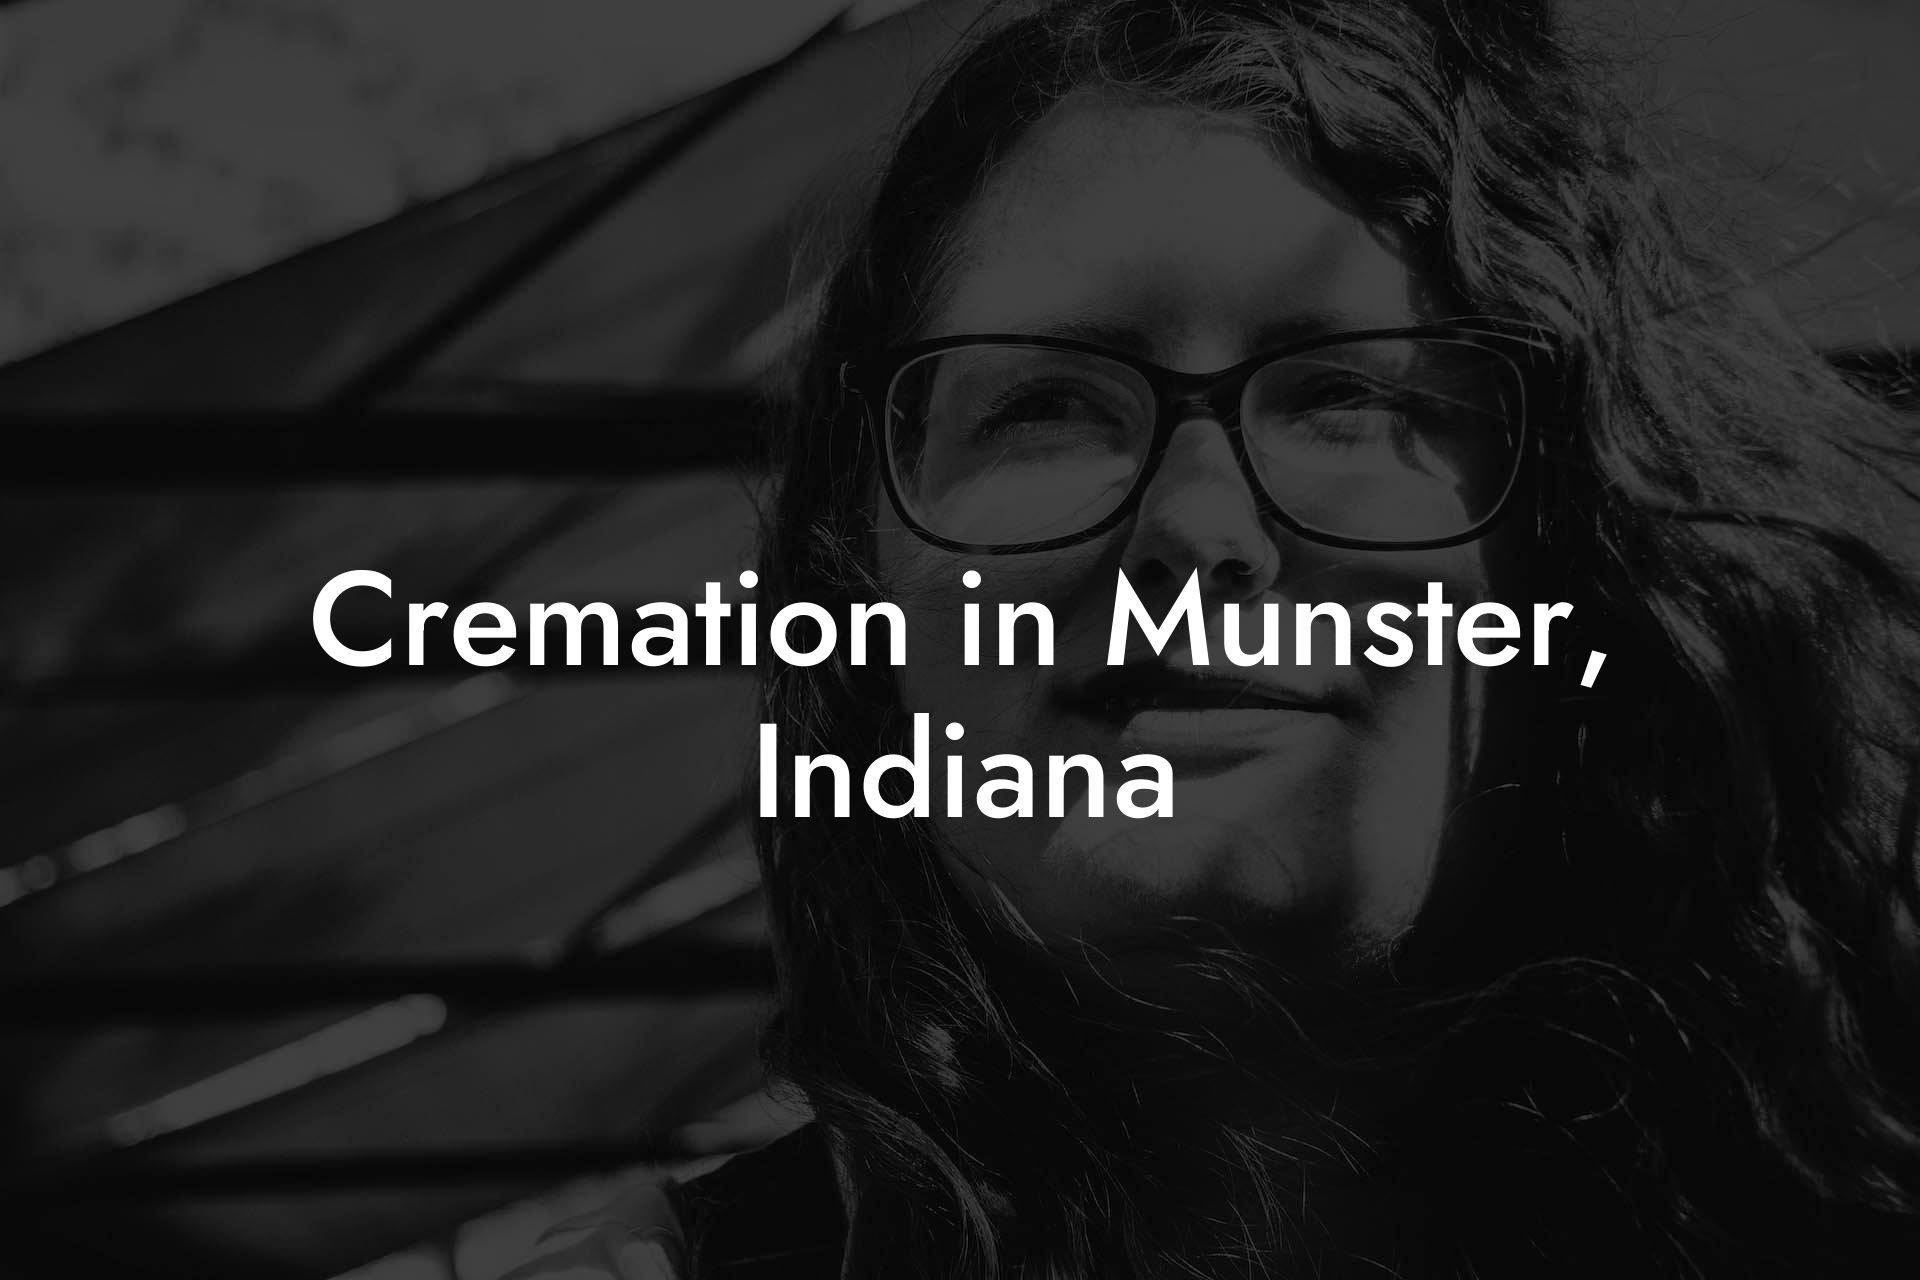 Cremation in Munster, Indiana